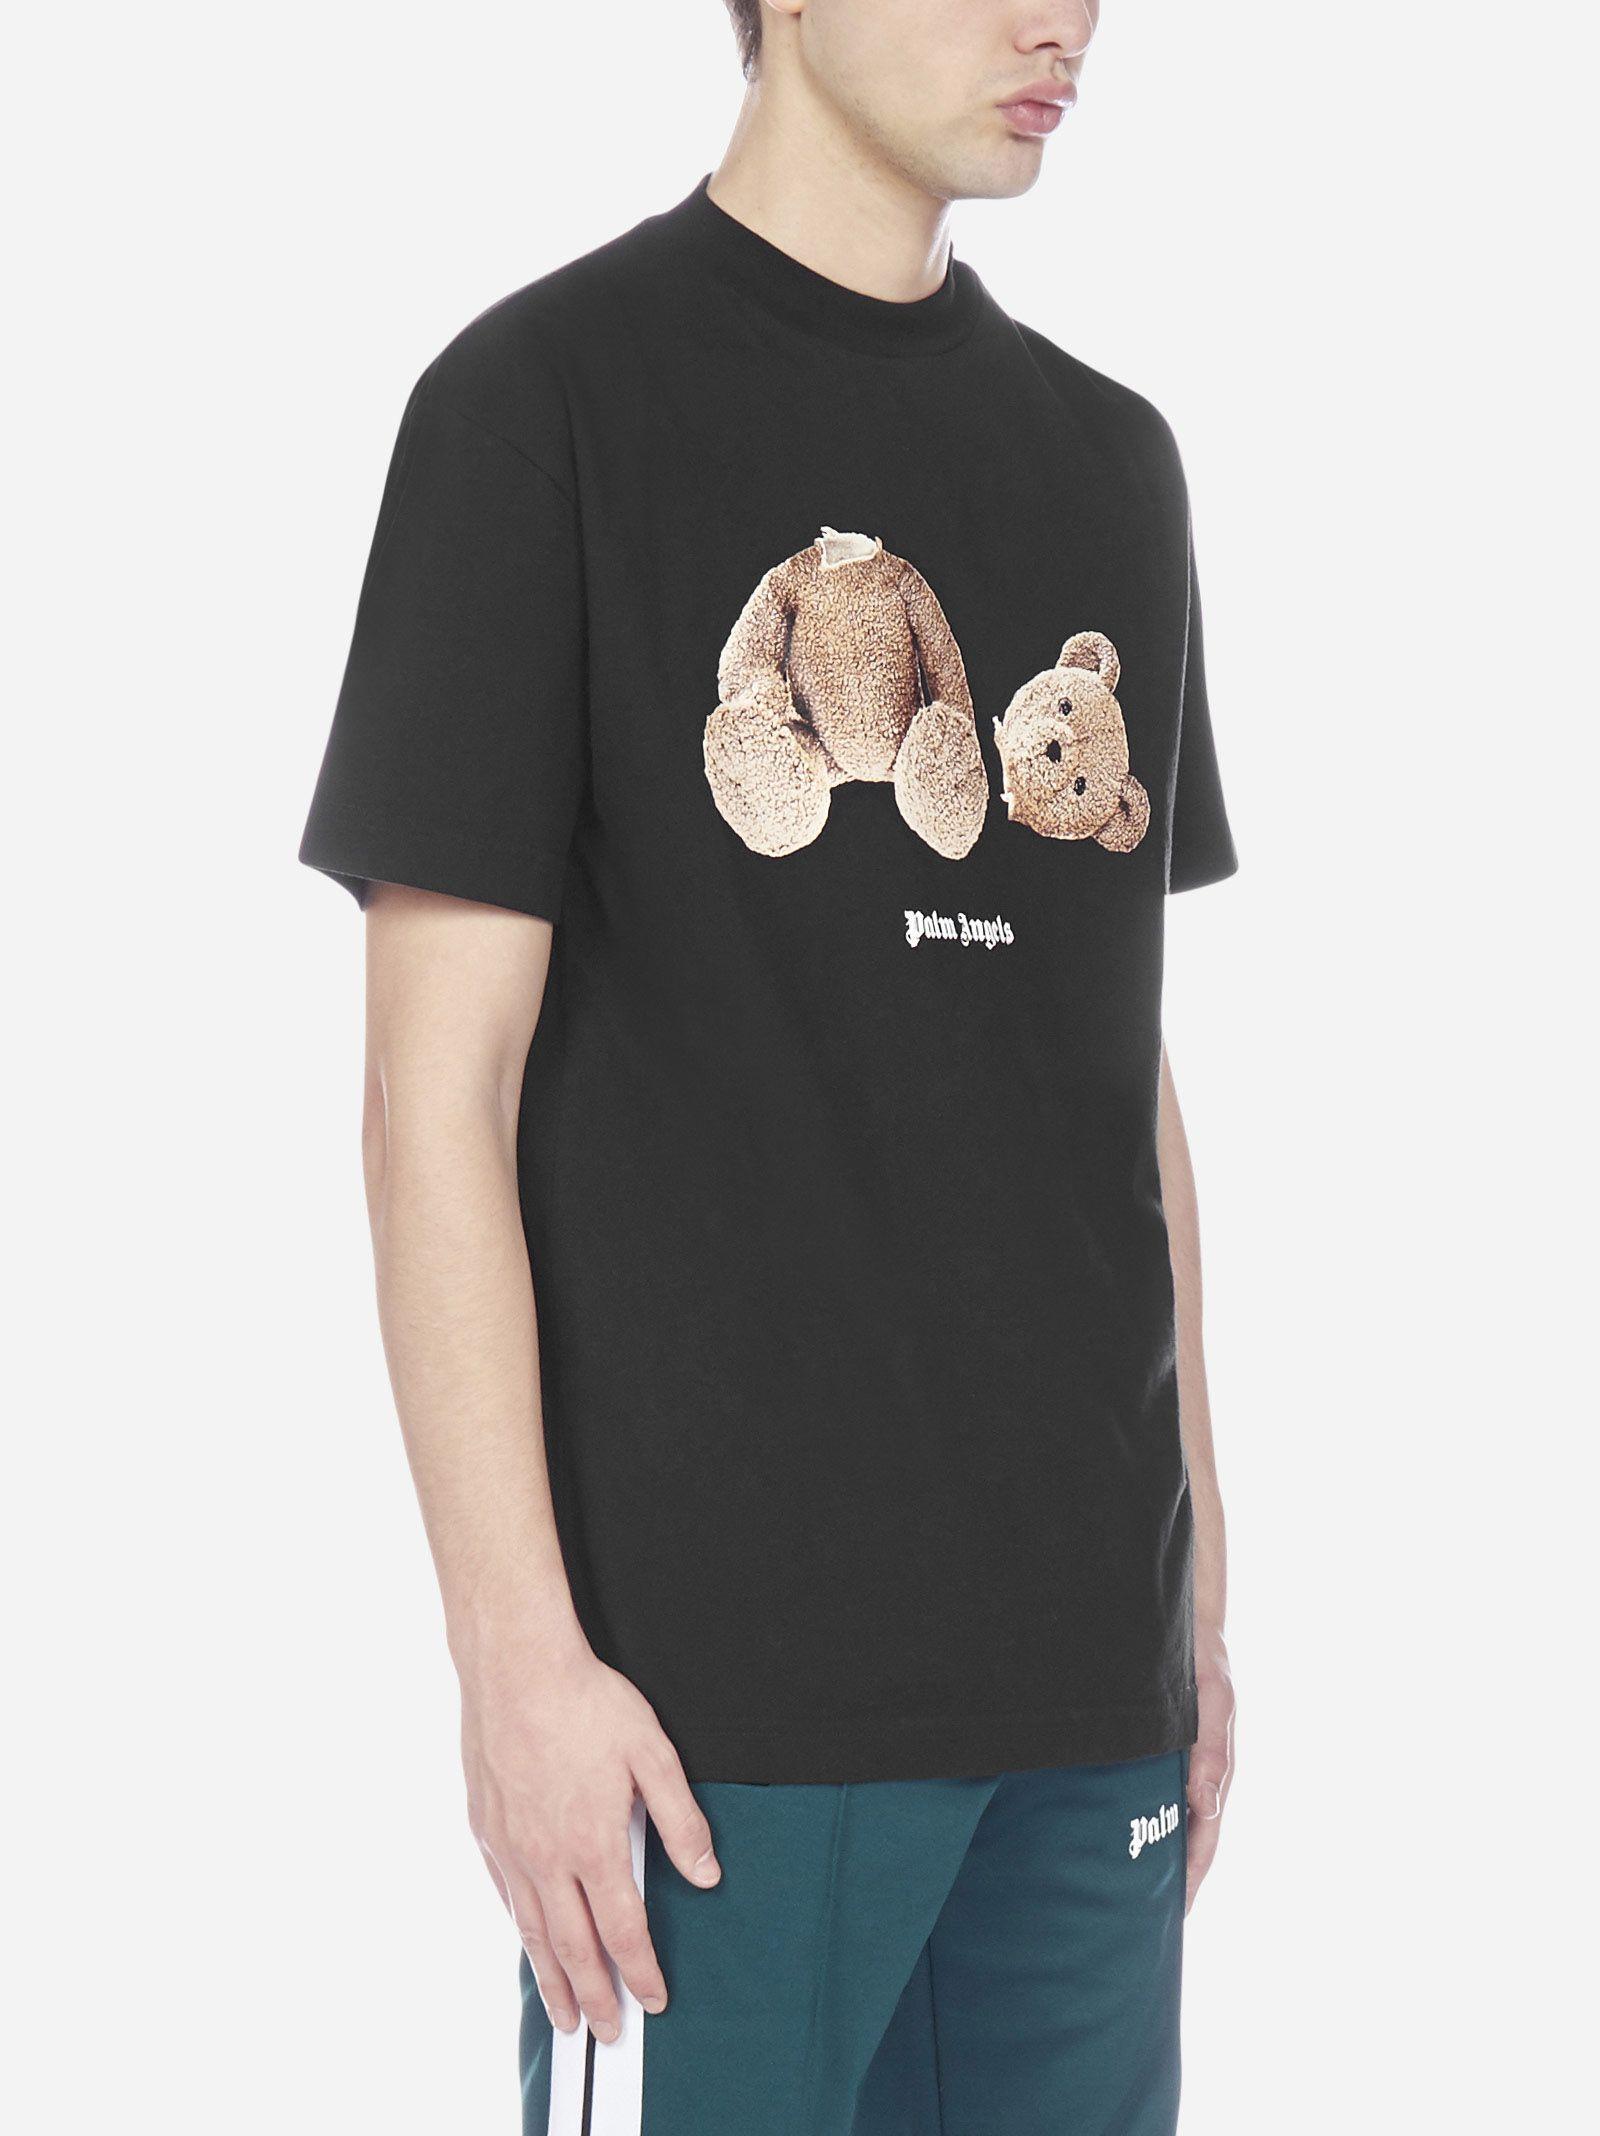 Palm Angels Cotton Bear Print T-shirt in Black for Men - Save 30% - Lyst